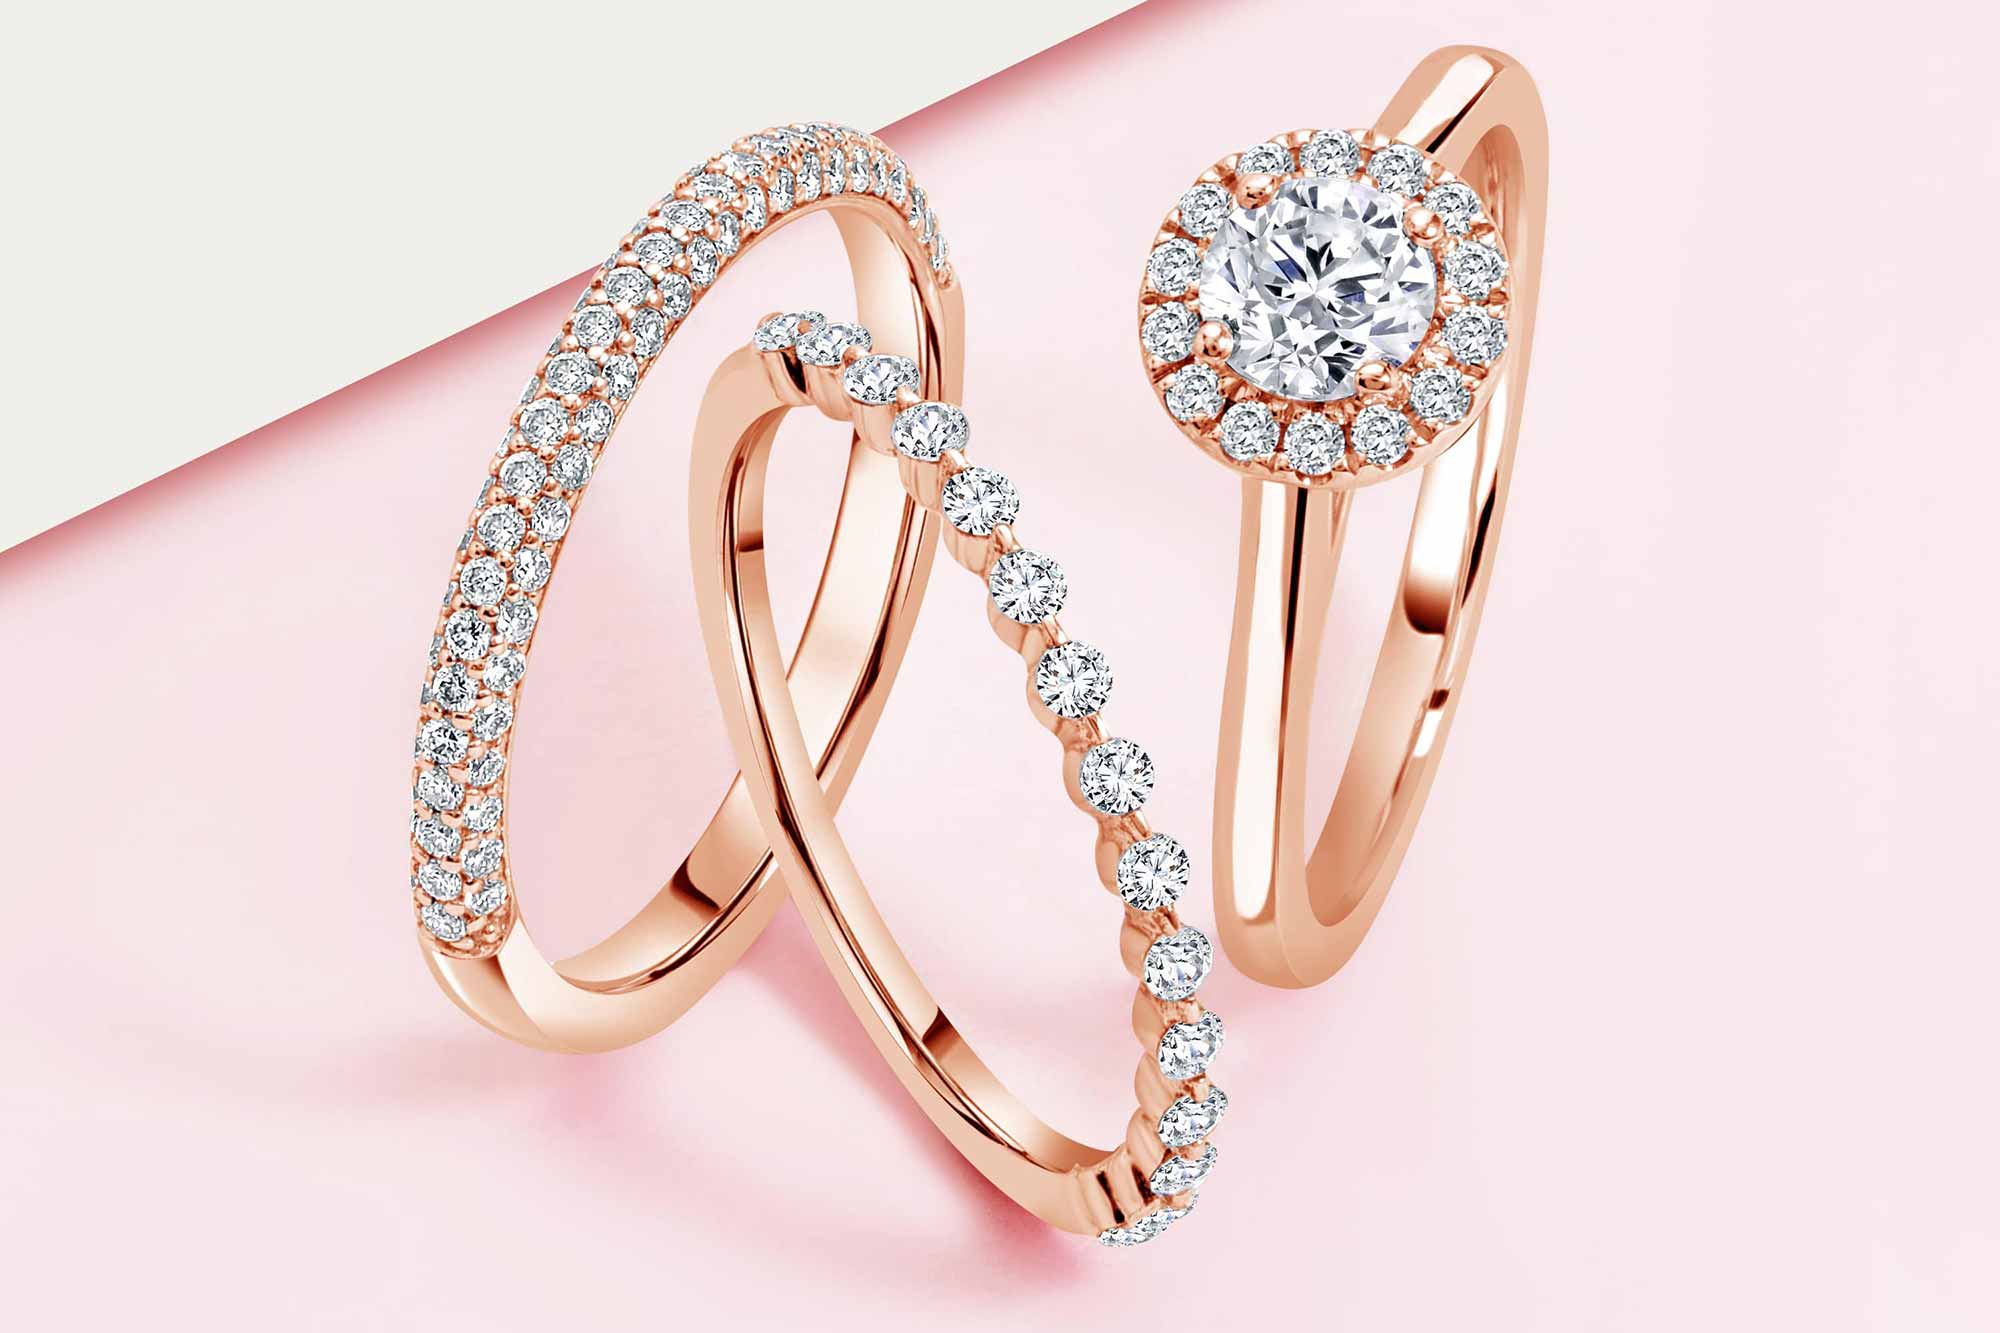 Rose gold engagement rings and wedding bands